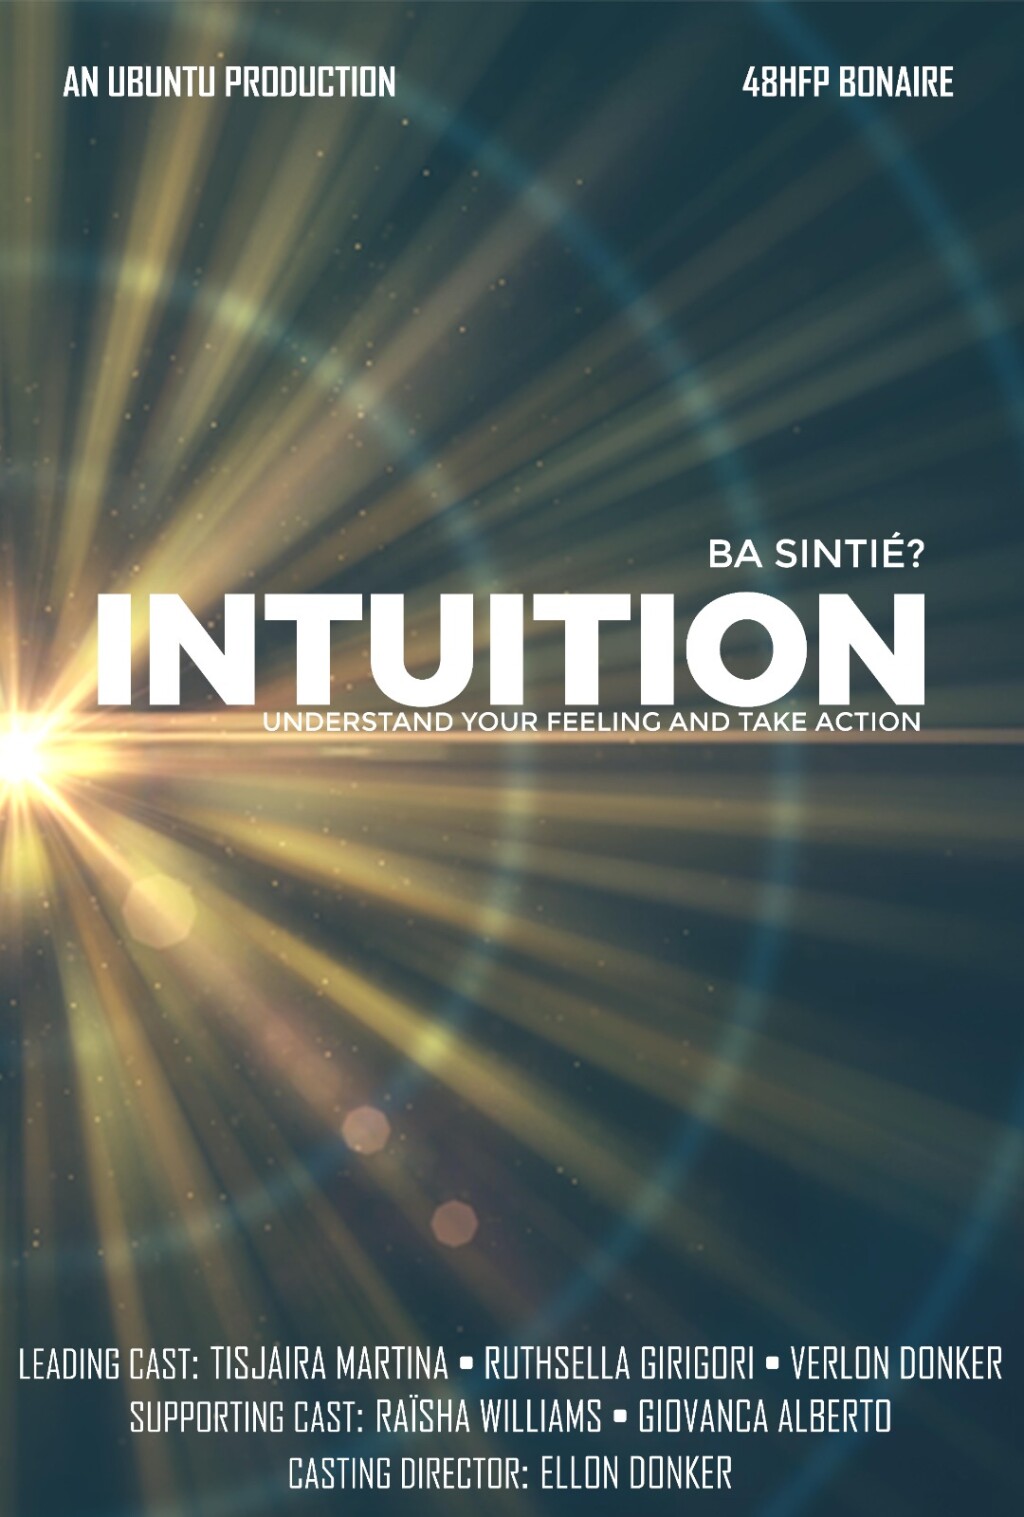 Filmposter for Intuition